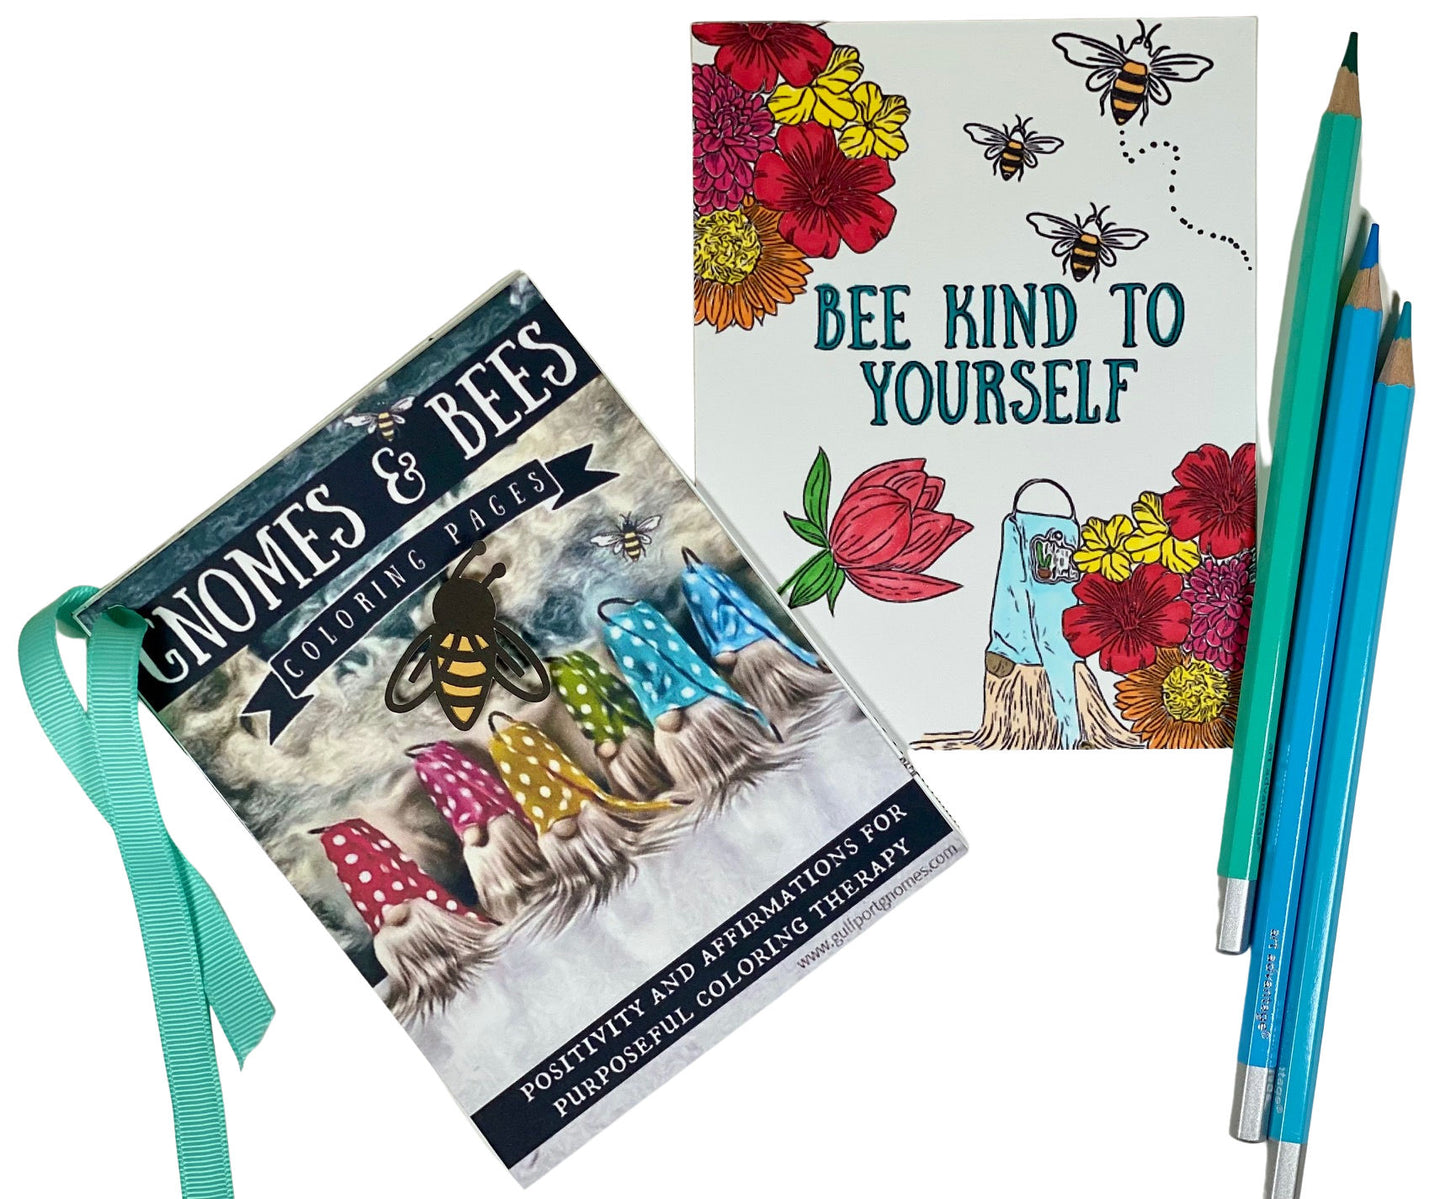 Coloring Book | Gnomes and Bees Coloring | Therapeutic Coloring | Digital Download | Instant Download Printable Coloring Book Gulfport Gnome™